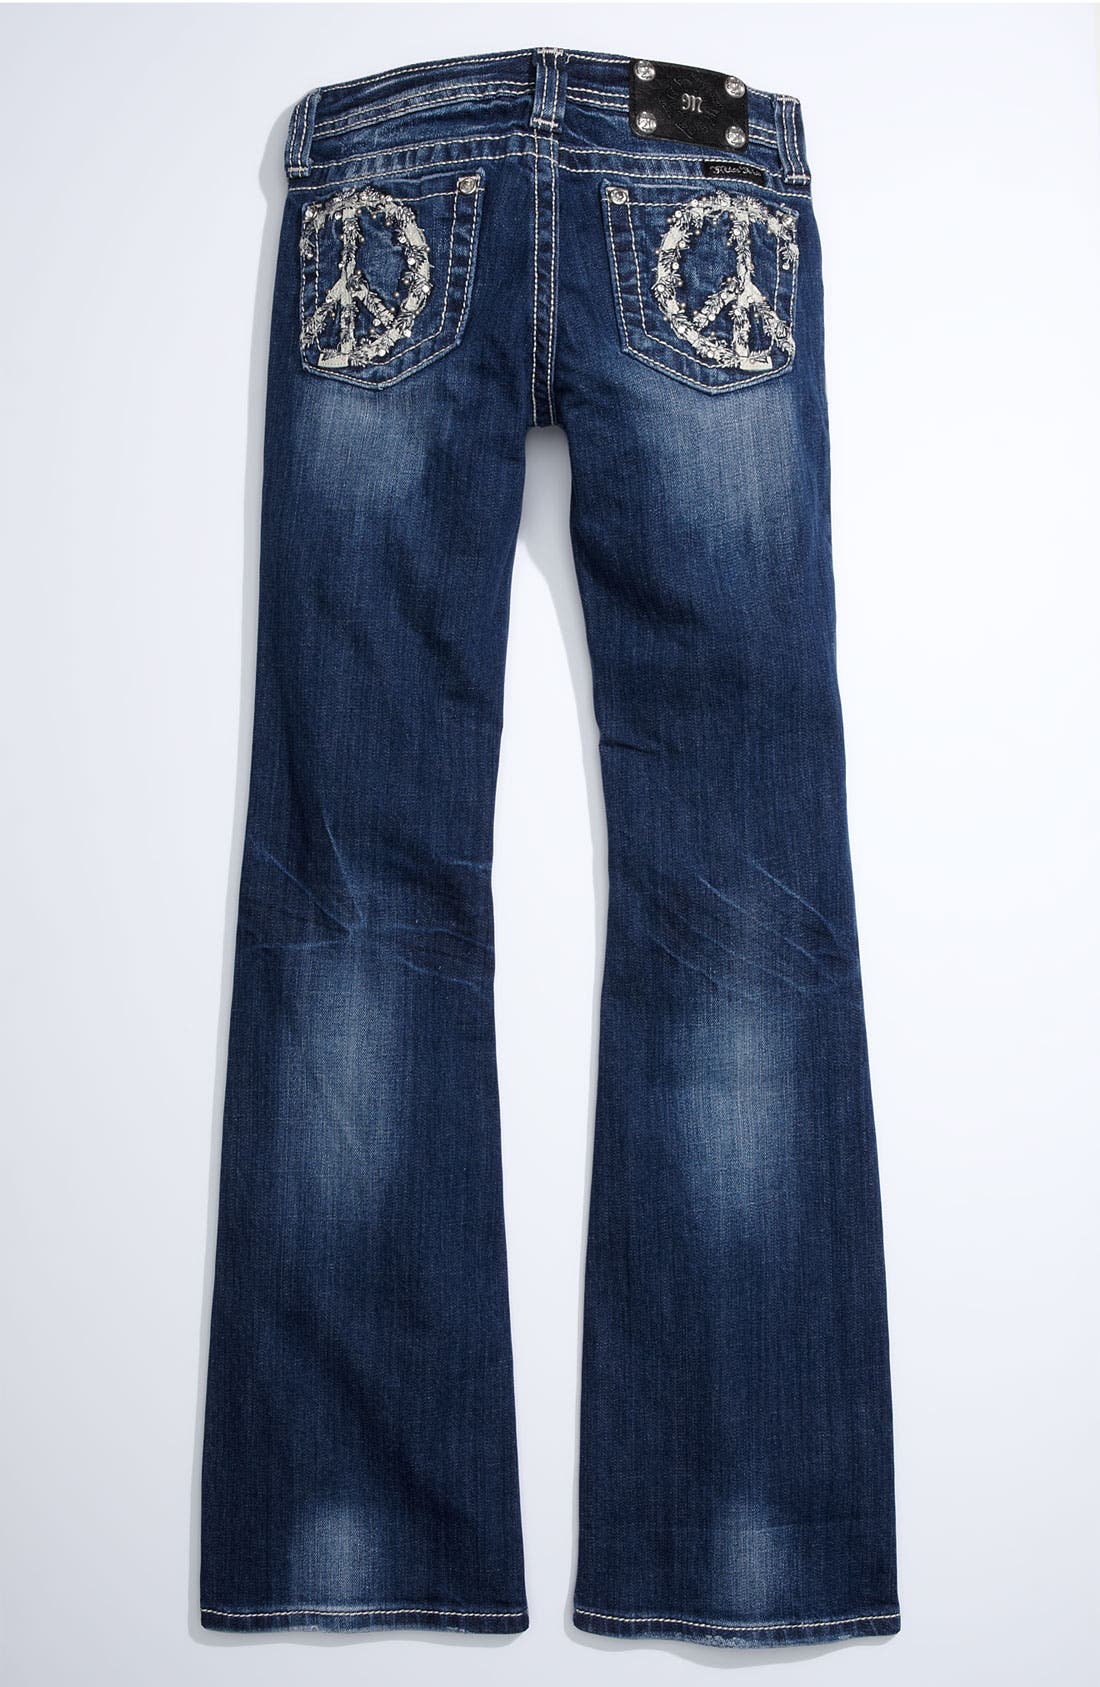 miss me jeans peace sign crystal pockets